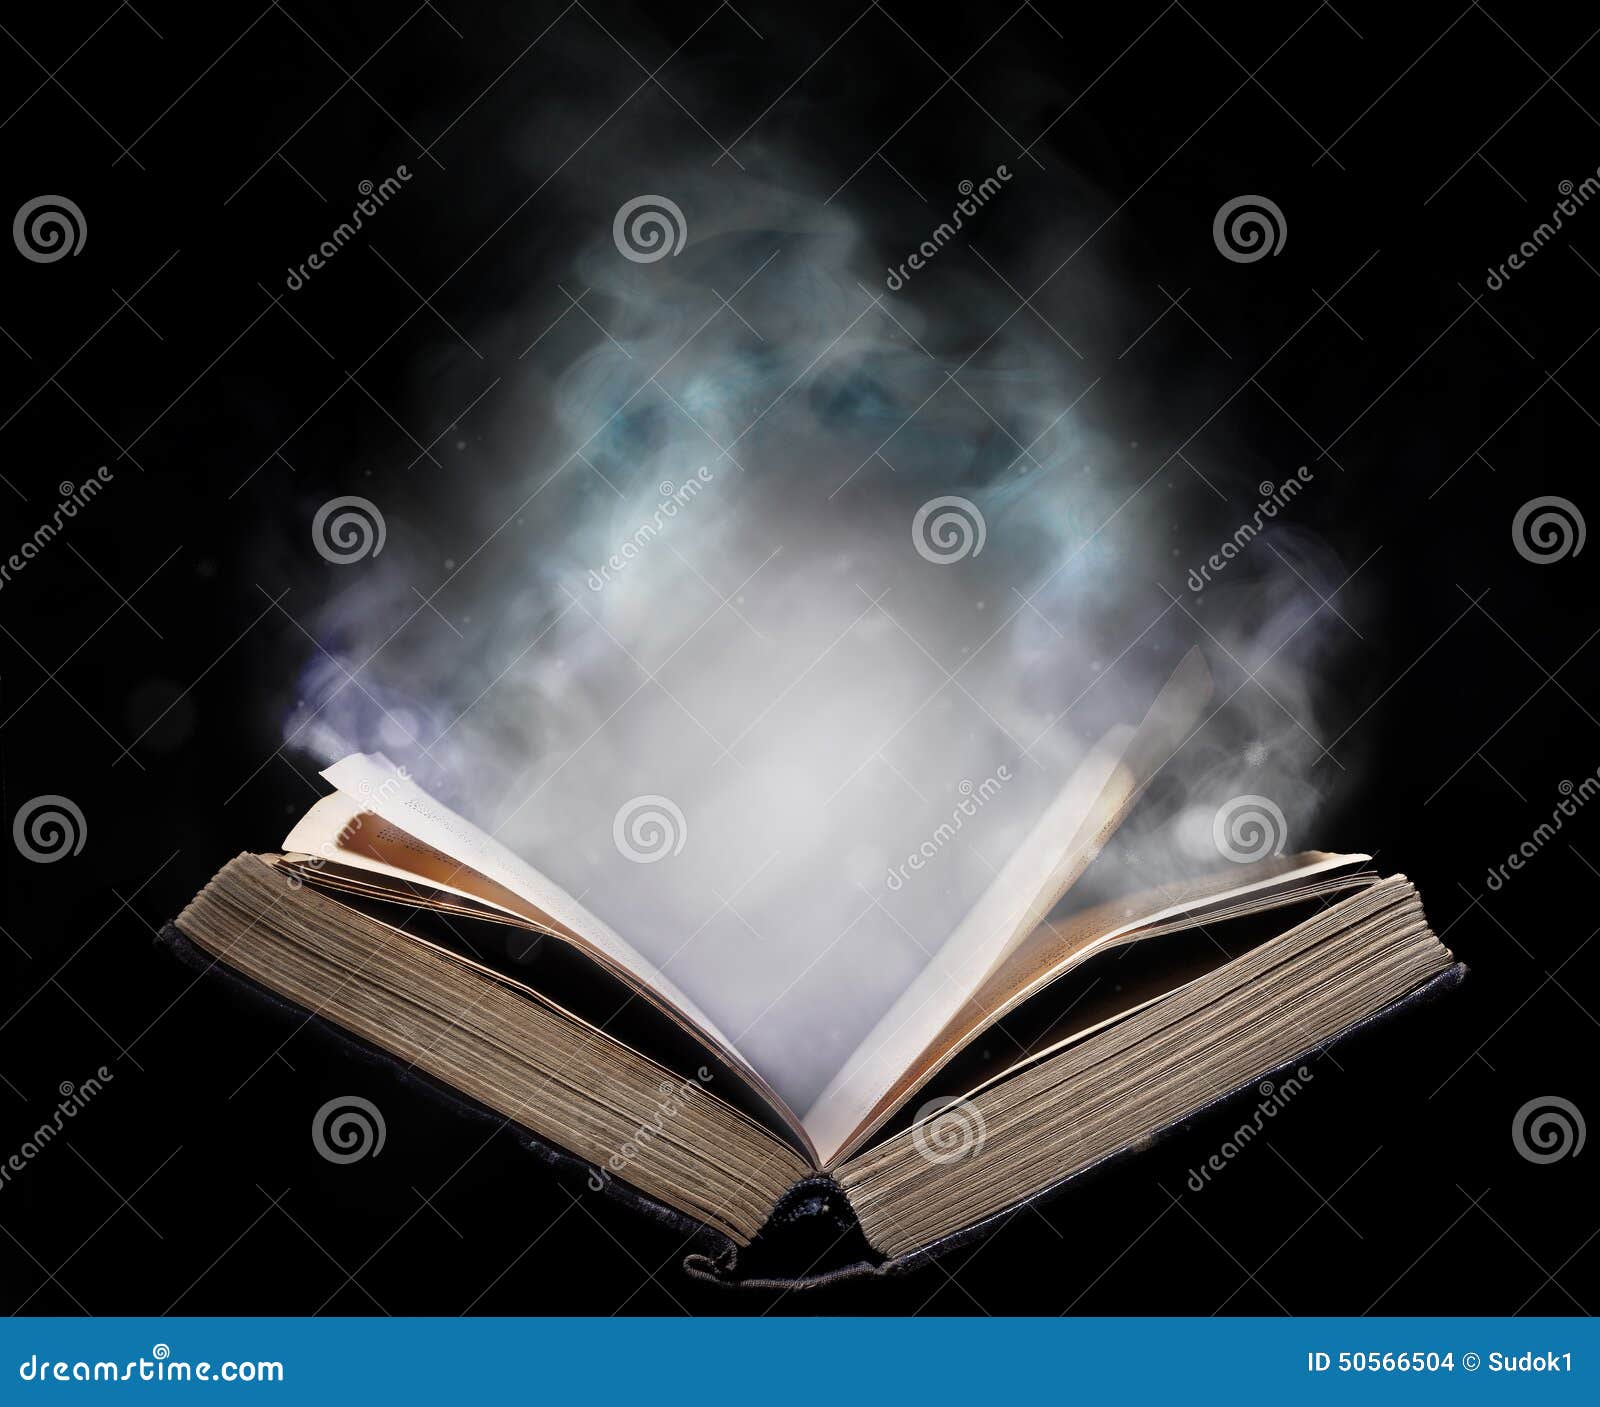 ancient open book in the magical smoke